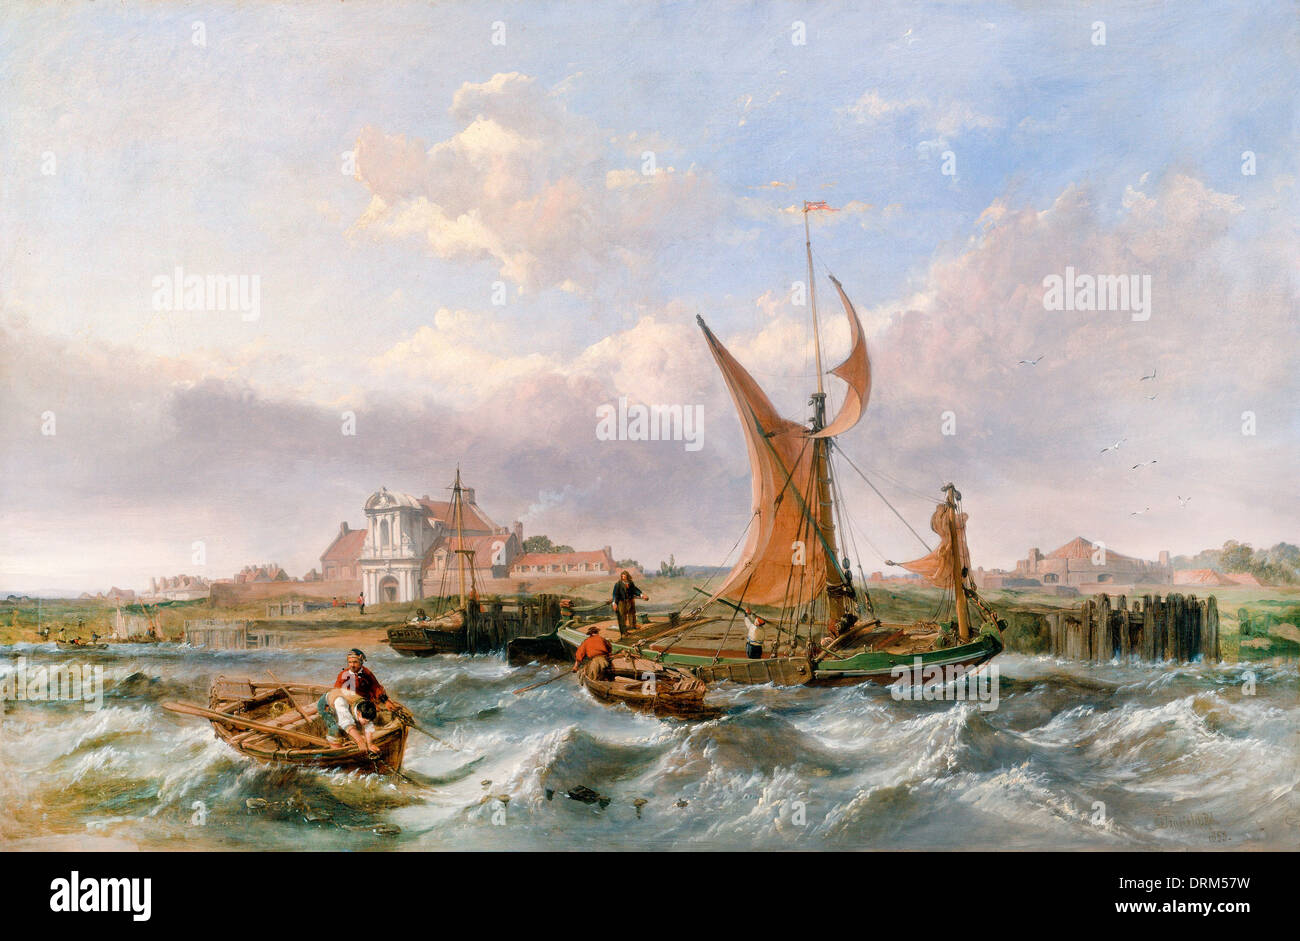 Clarkson Frederick Stanfield, Tilbury Fort--Wind Against the Tide 1853 Oil  on canvas. Yale Center for British Art, New Haven, US Stock Photo - Alamy